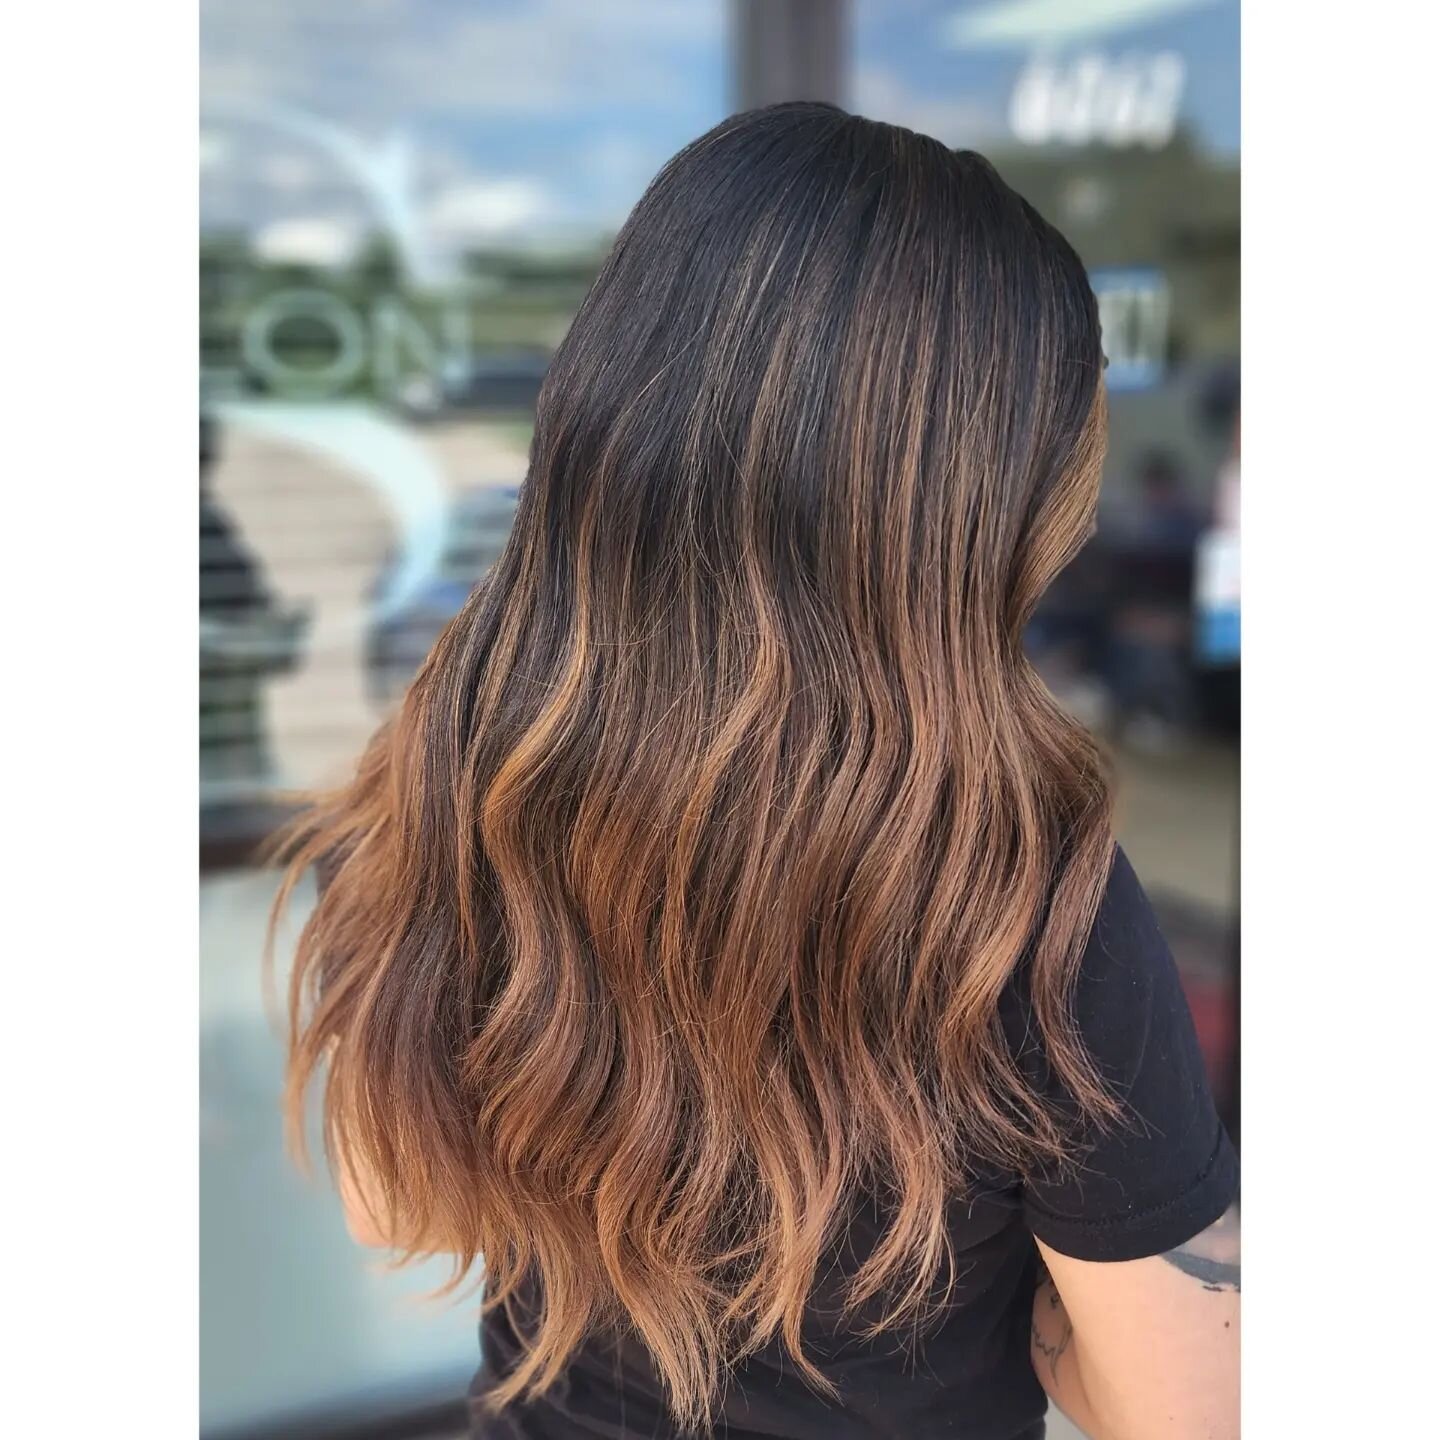 Bring up the bayalage 
40vol progress Teased in foils
On dry hair Toned with view 8,0 30g 8,18 15g 7,32 15g 20 min
One row of 18&quot; aqua extensions 
#davineseducation #davinesnorthamerica #davines #donewithdavines #moreinside #essentials #lovesmoo